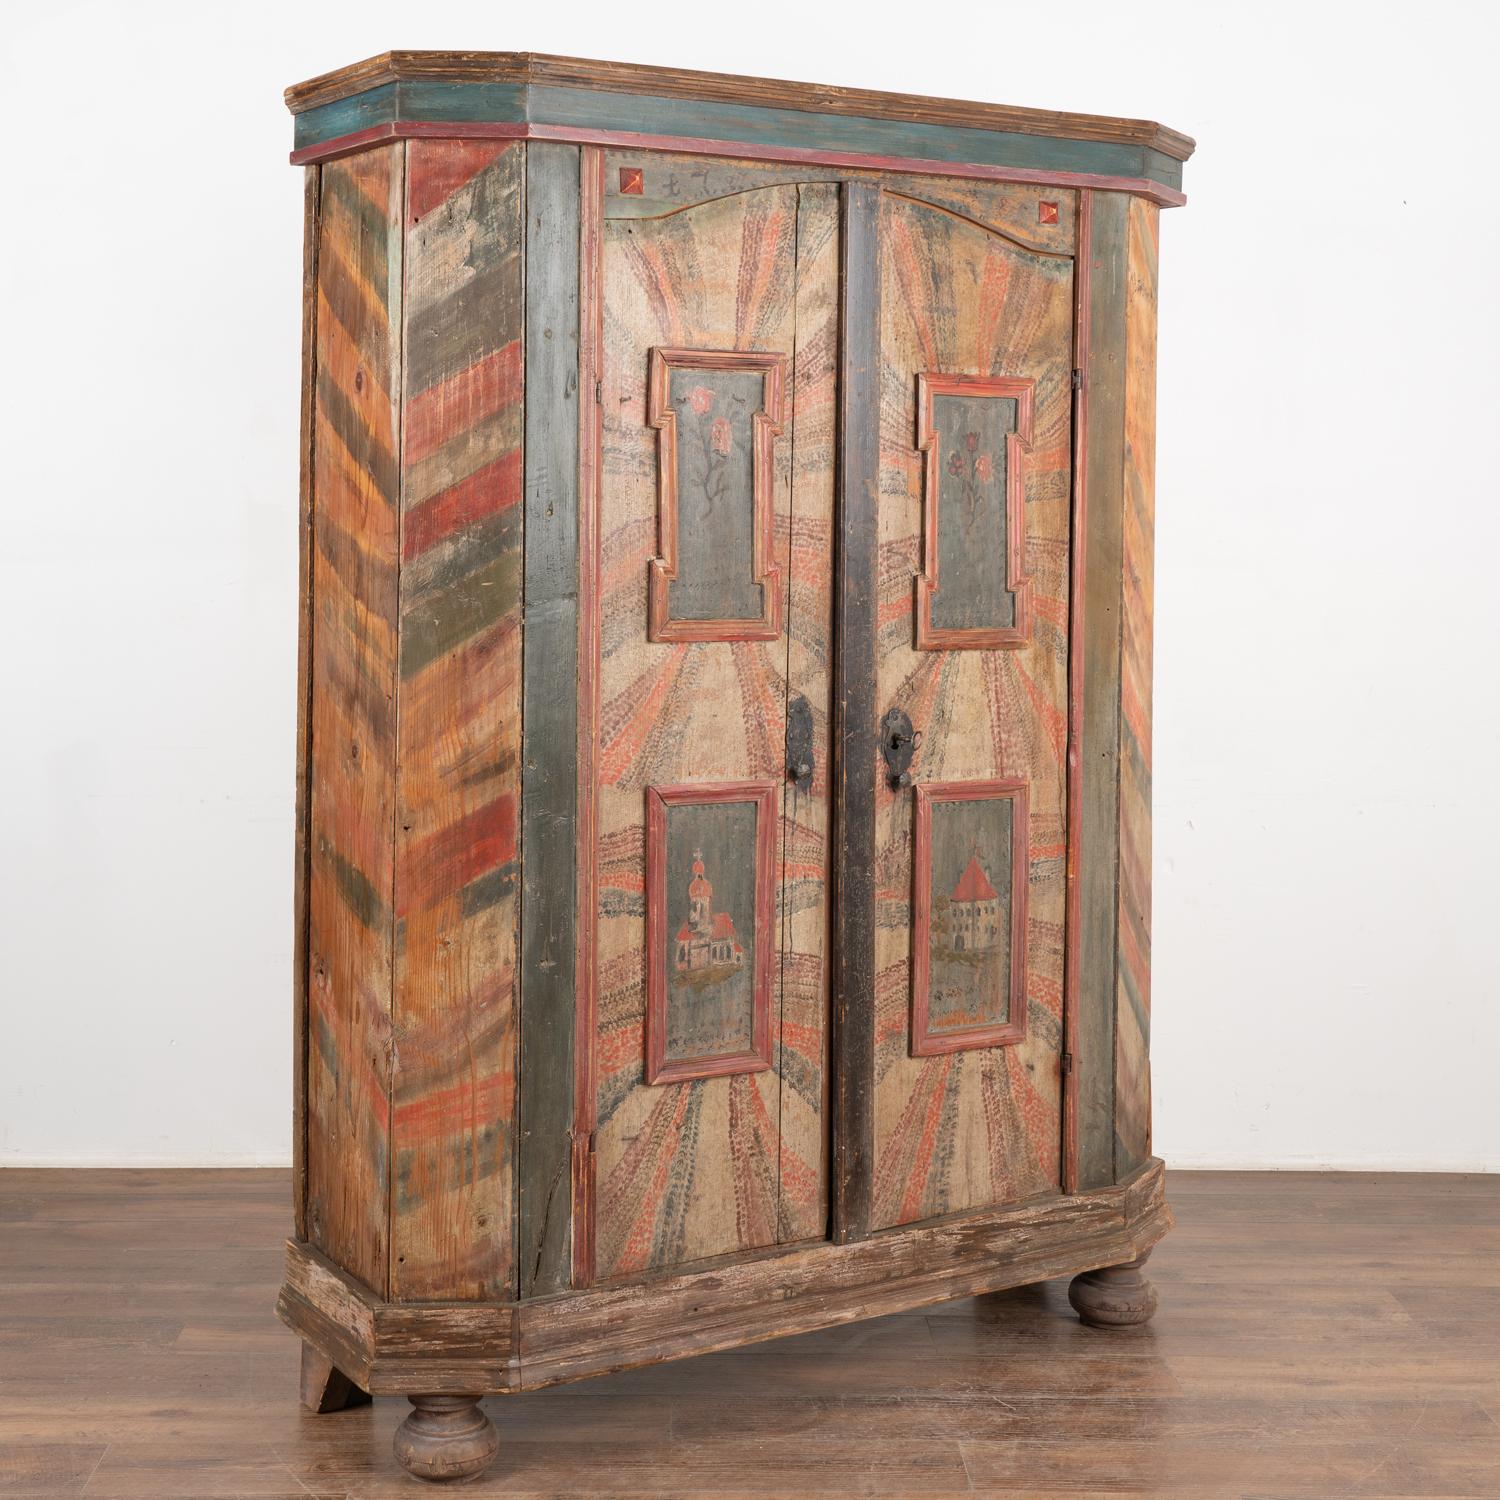 This original painted armoire still maintains the quality and details of the hand-painted finish with unique and colorful background. Shades of green, teal blue, red and brown are all on display.
Date of 1785 is faintly visible along the upper